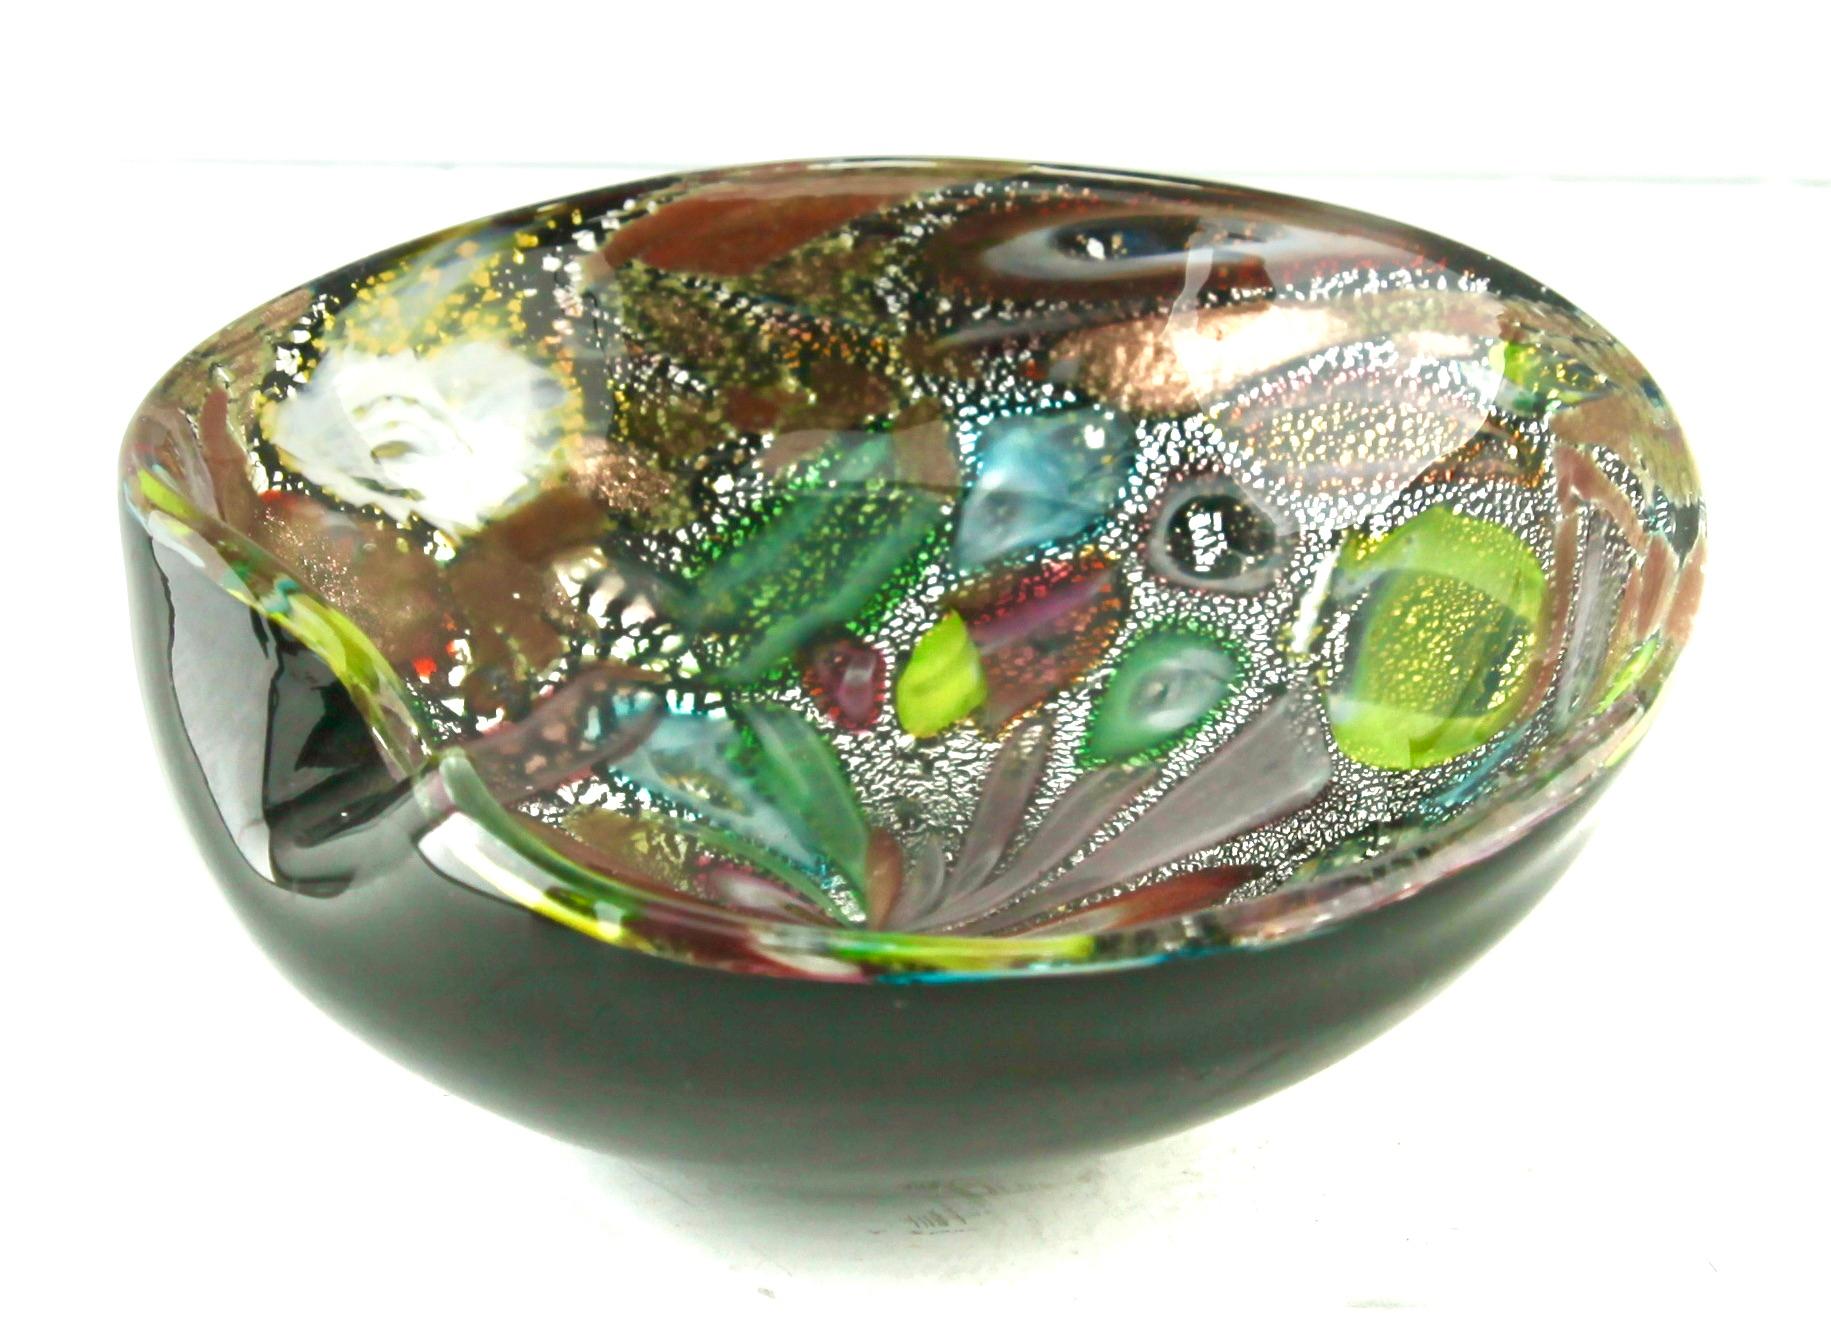 Italian Murano Art Glass Bowl Black Shell, Metals and Bright Colors, Attributed to AVEM